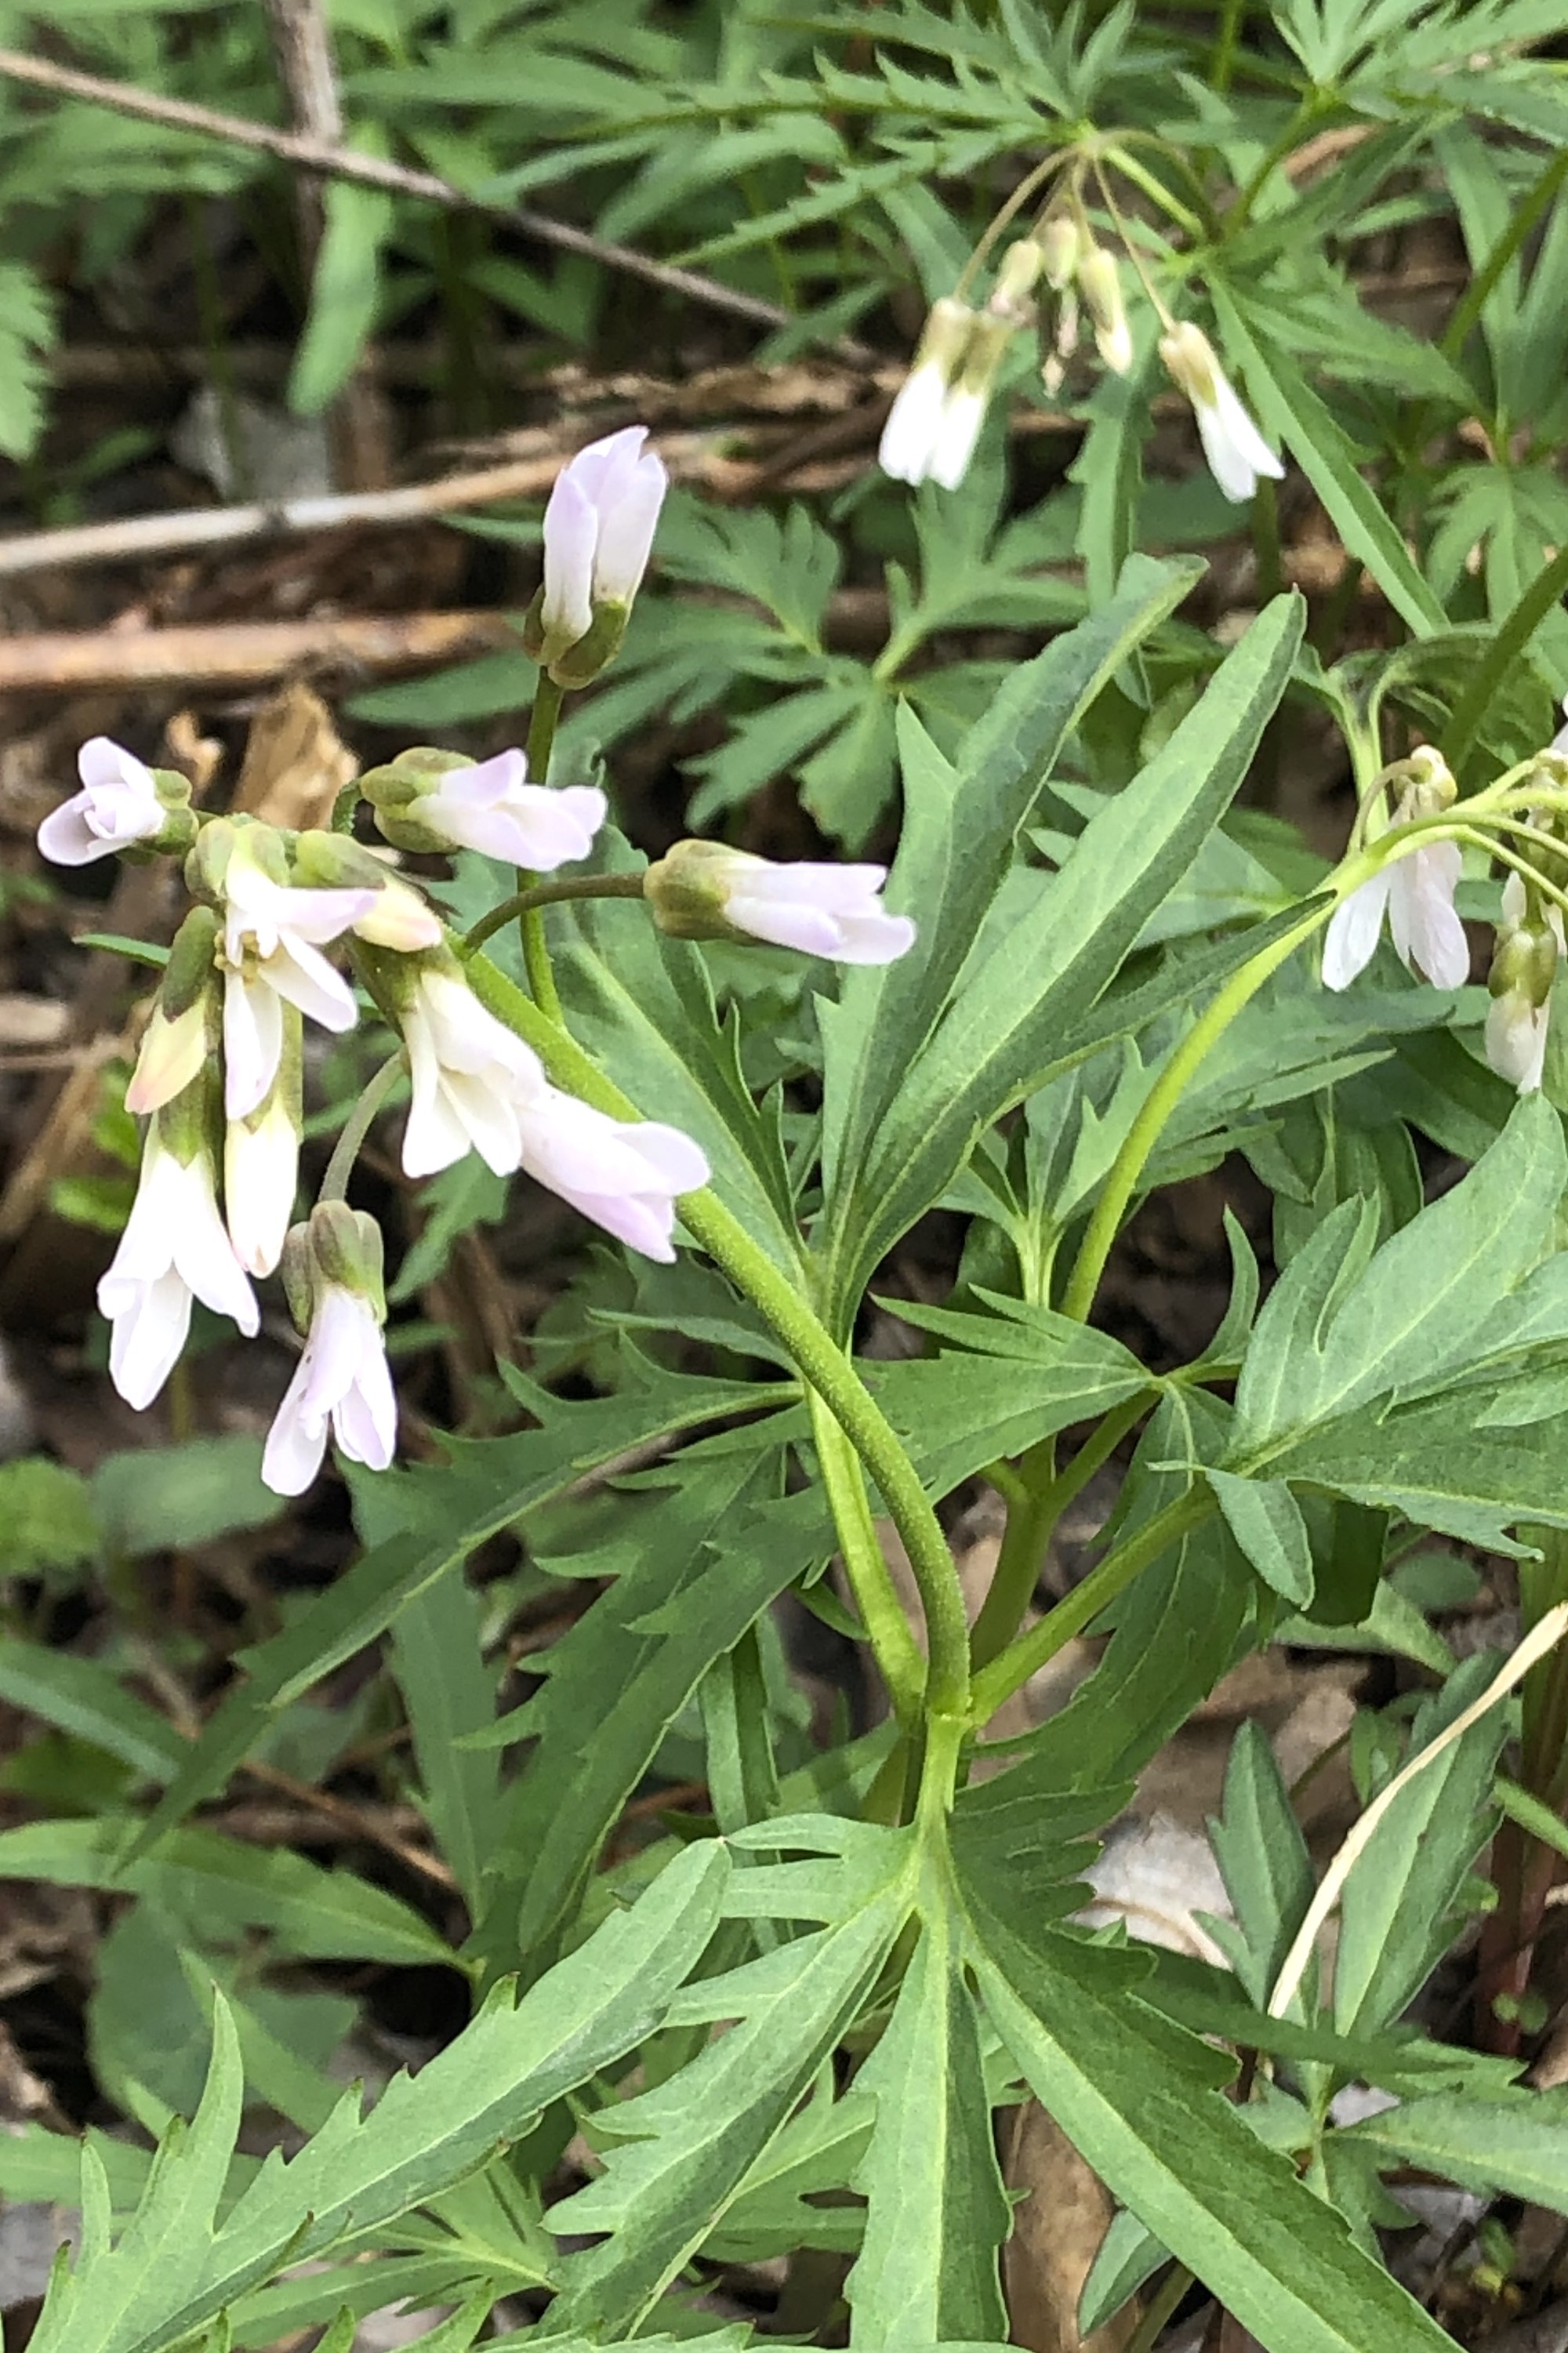 Cutleaf Toothwort near Council Ring Spring on April 13, 2019.